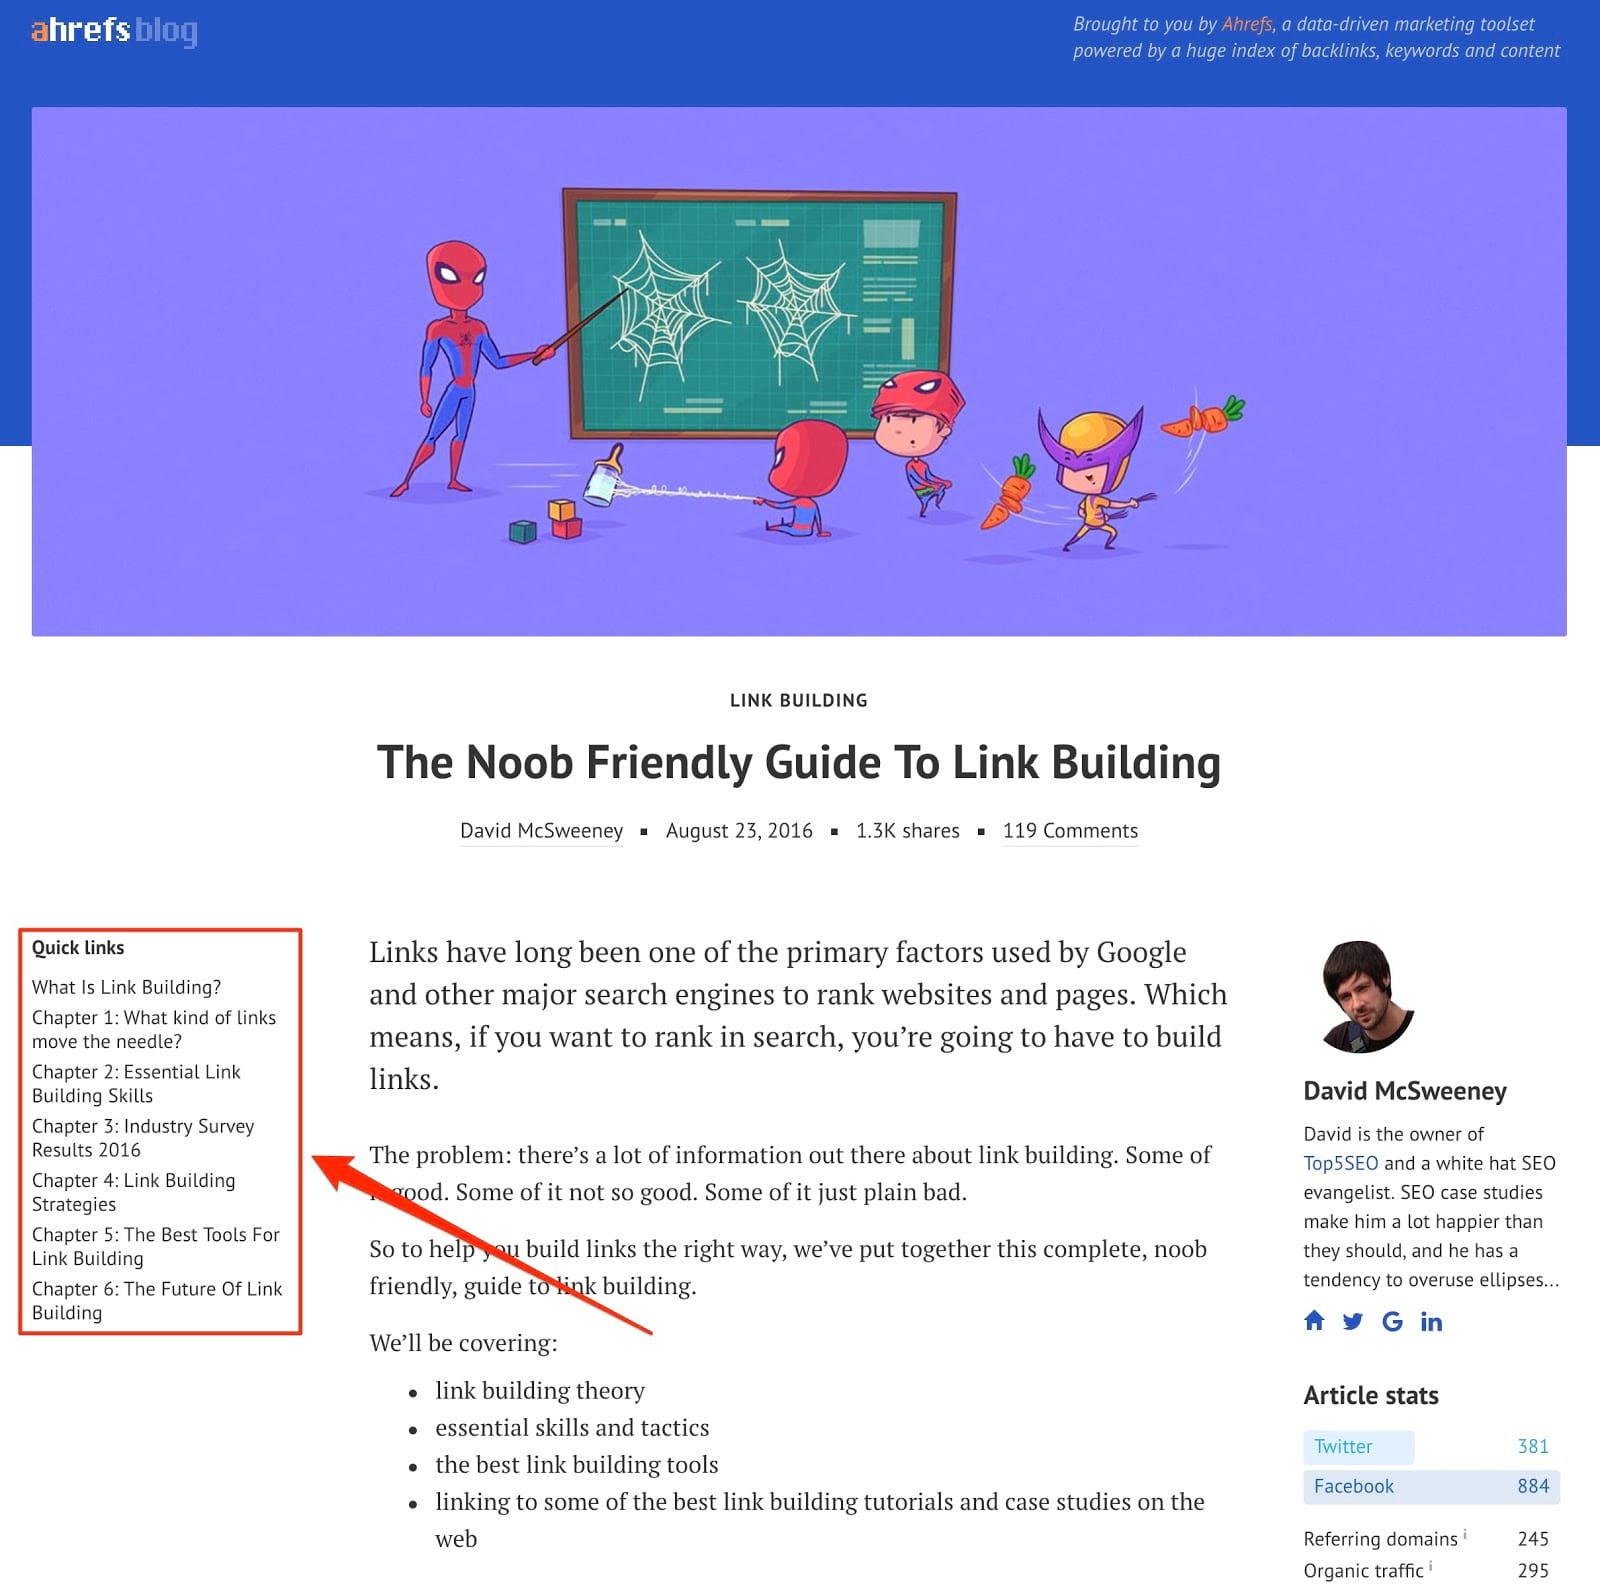 The Noob Friendly Guide To Link Building